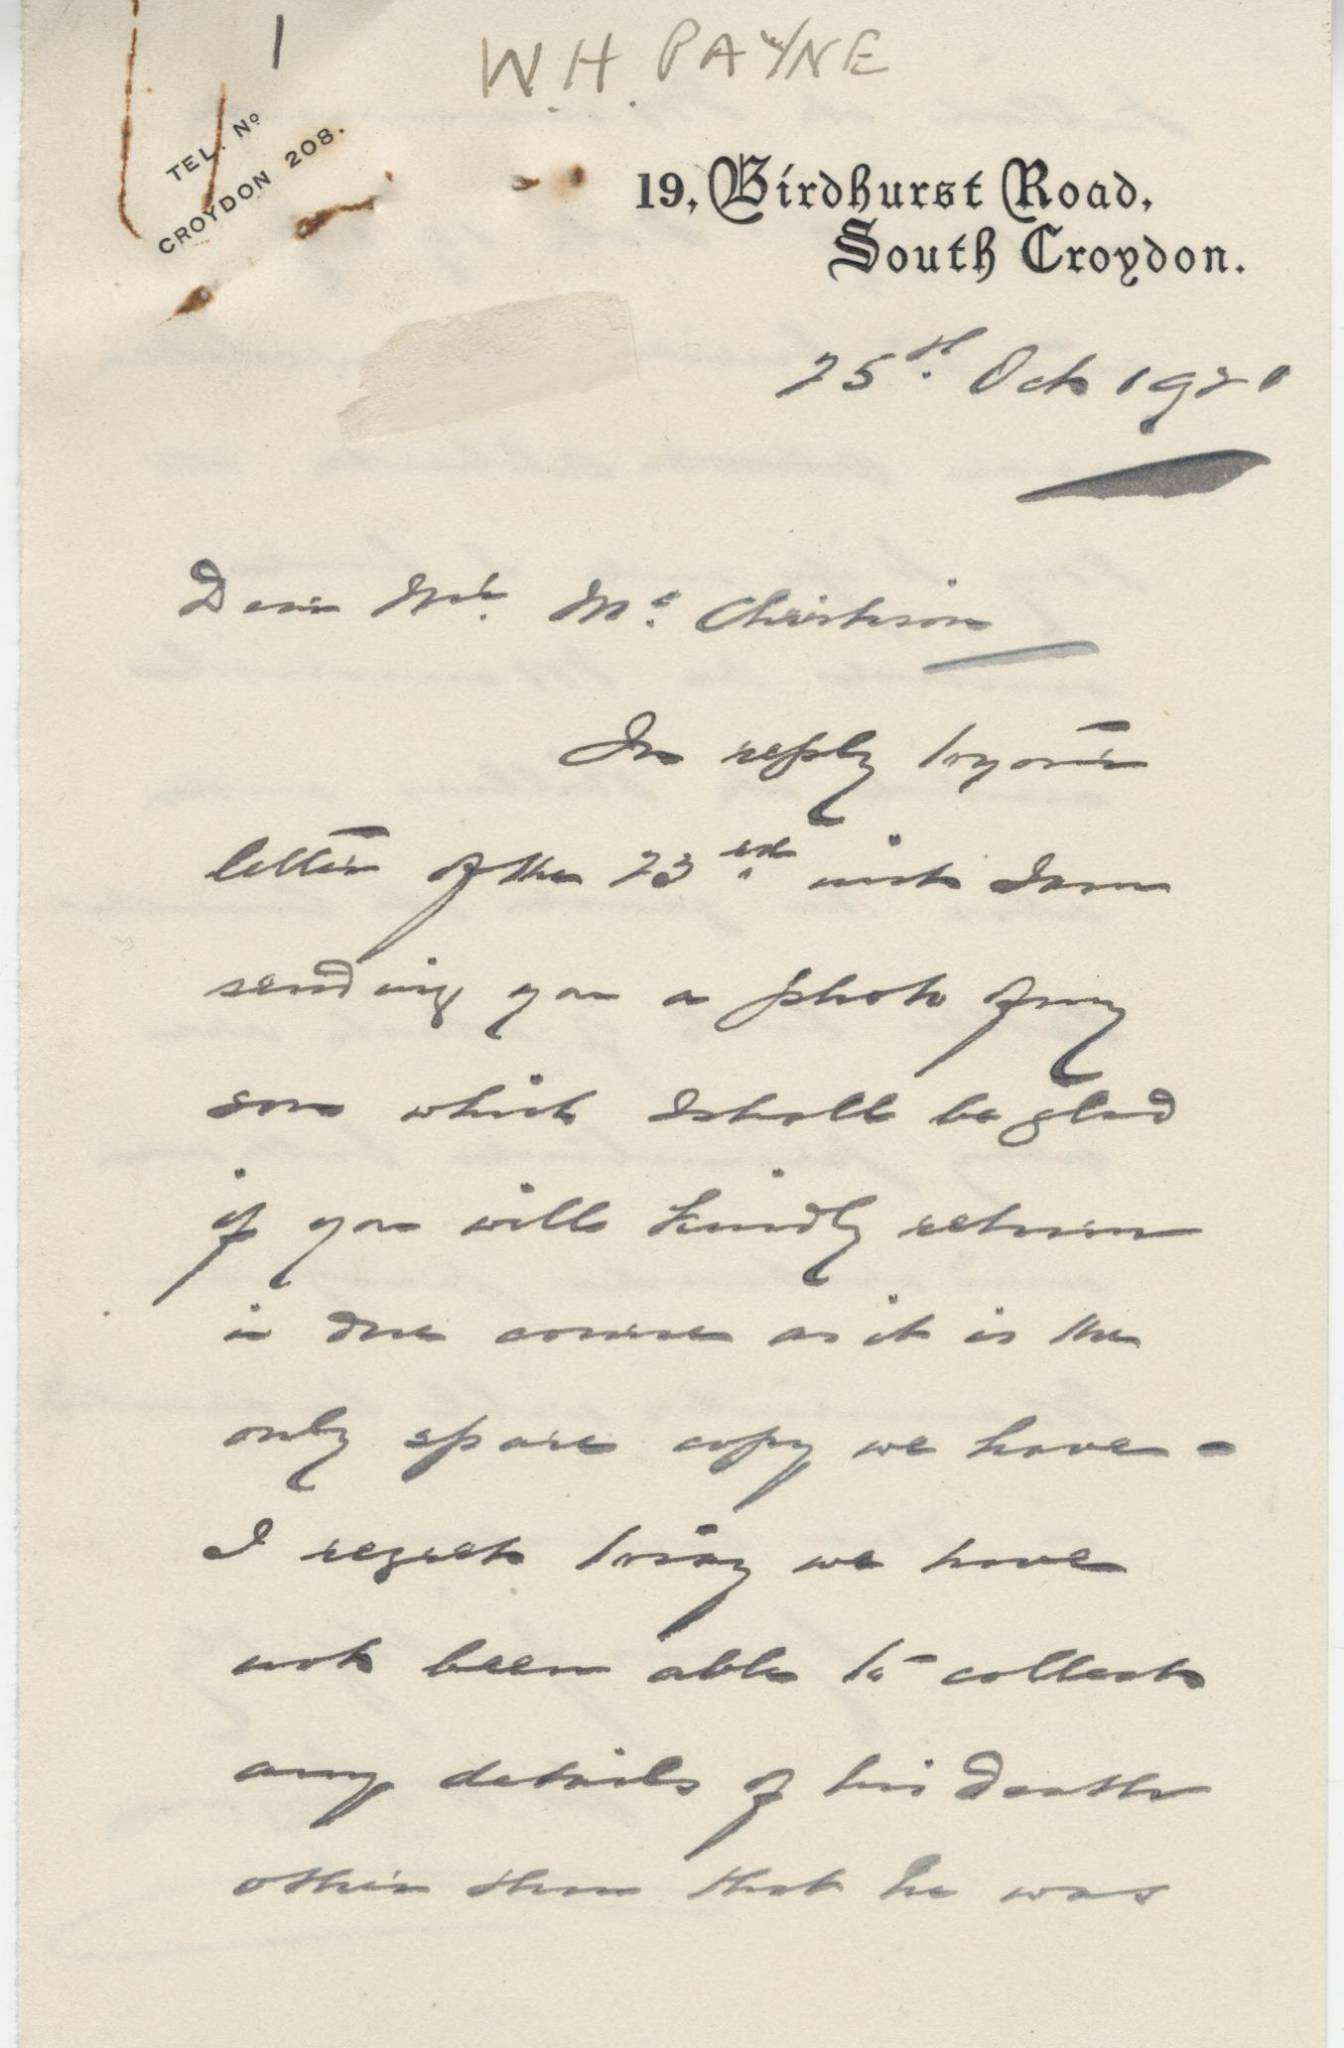 Payne WH Father Letter 1